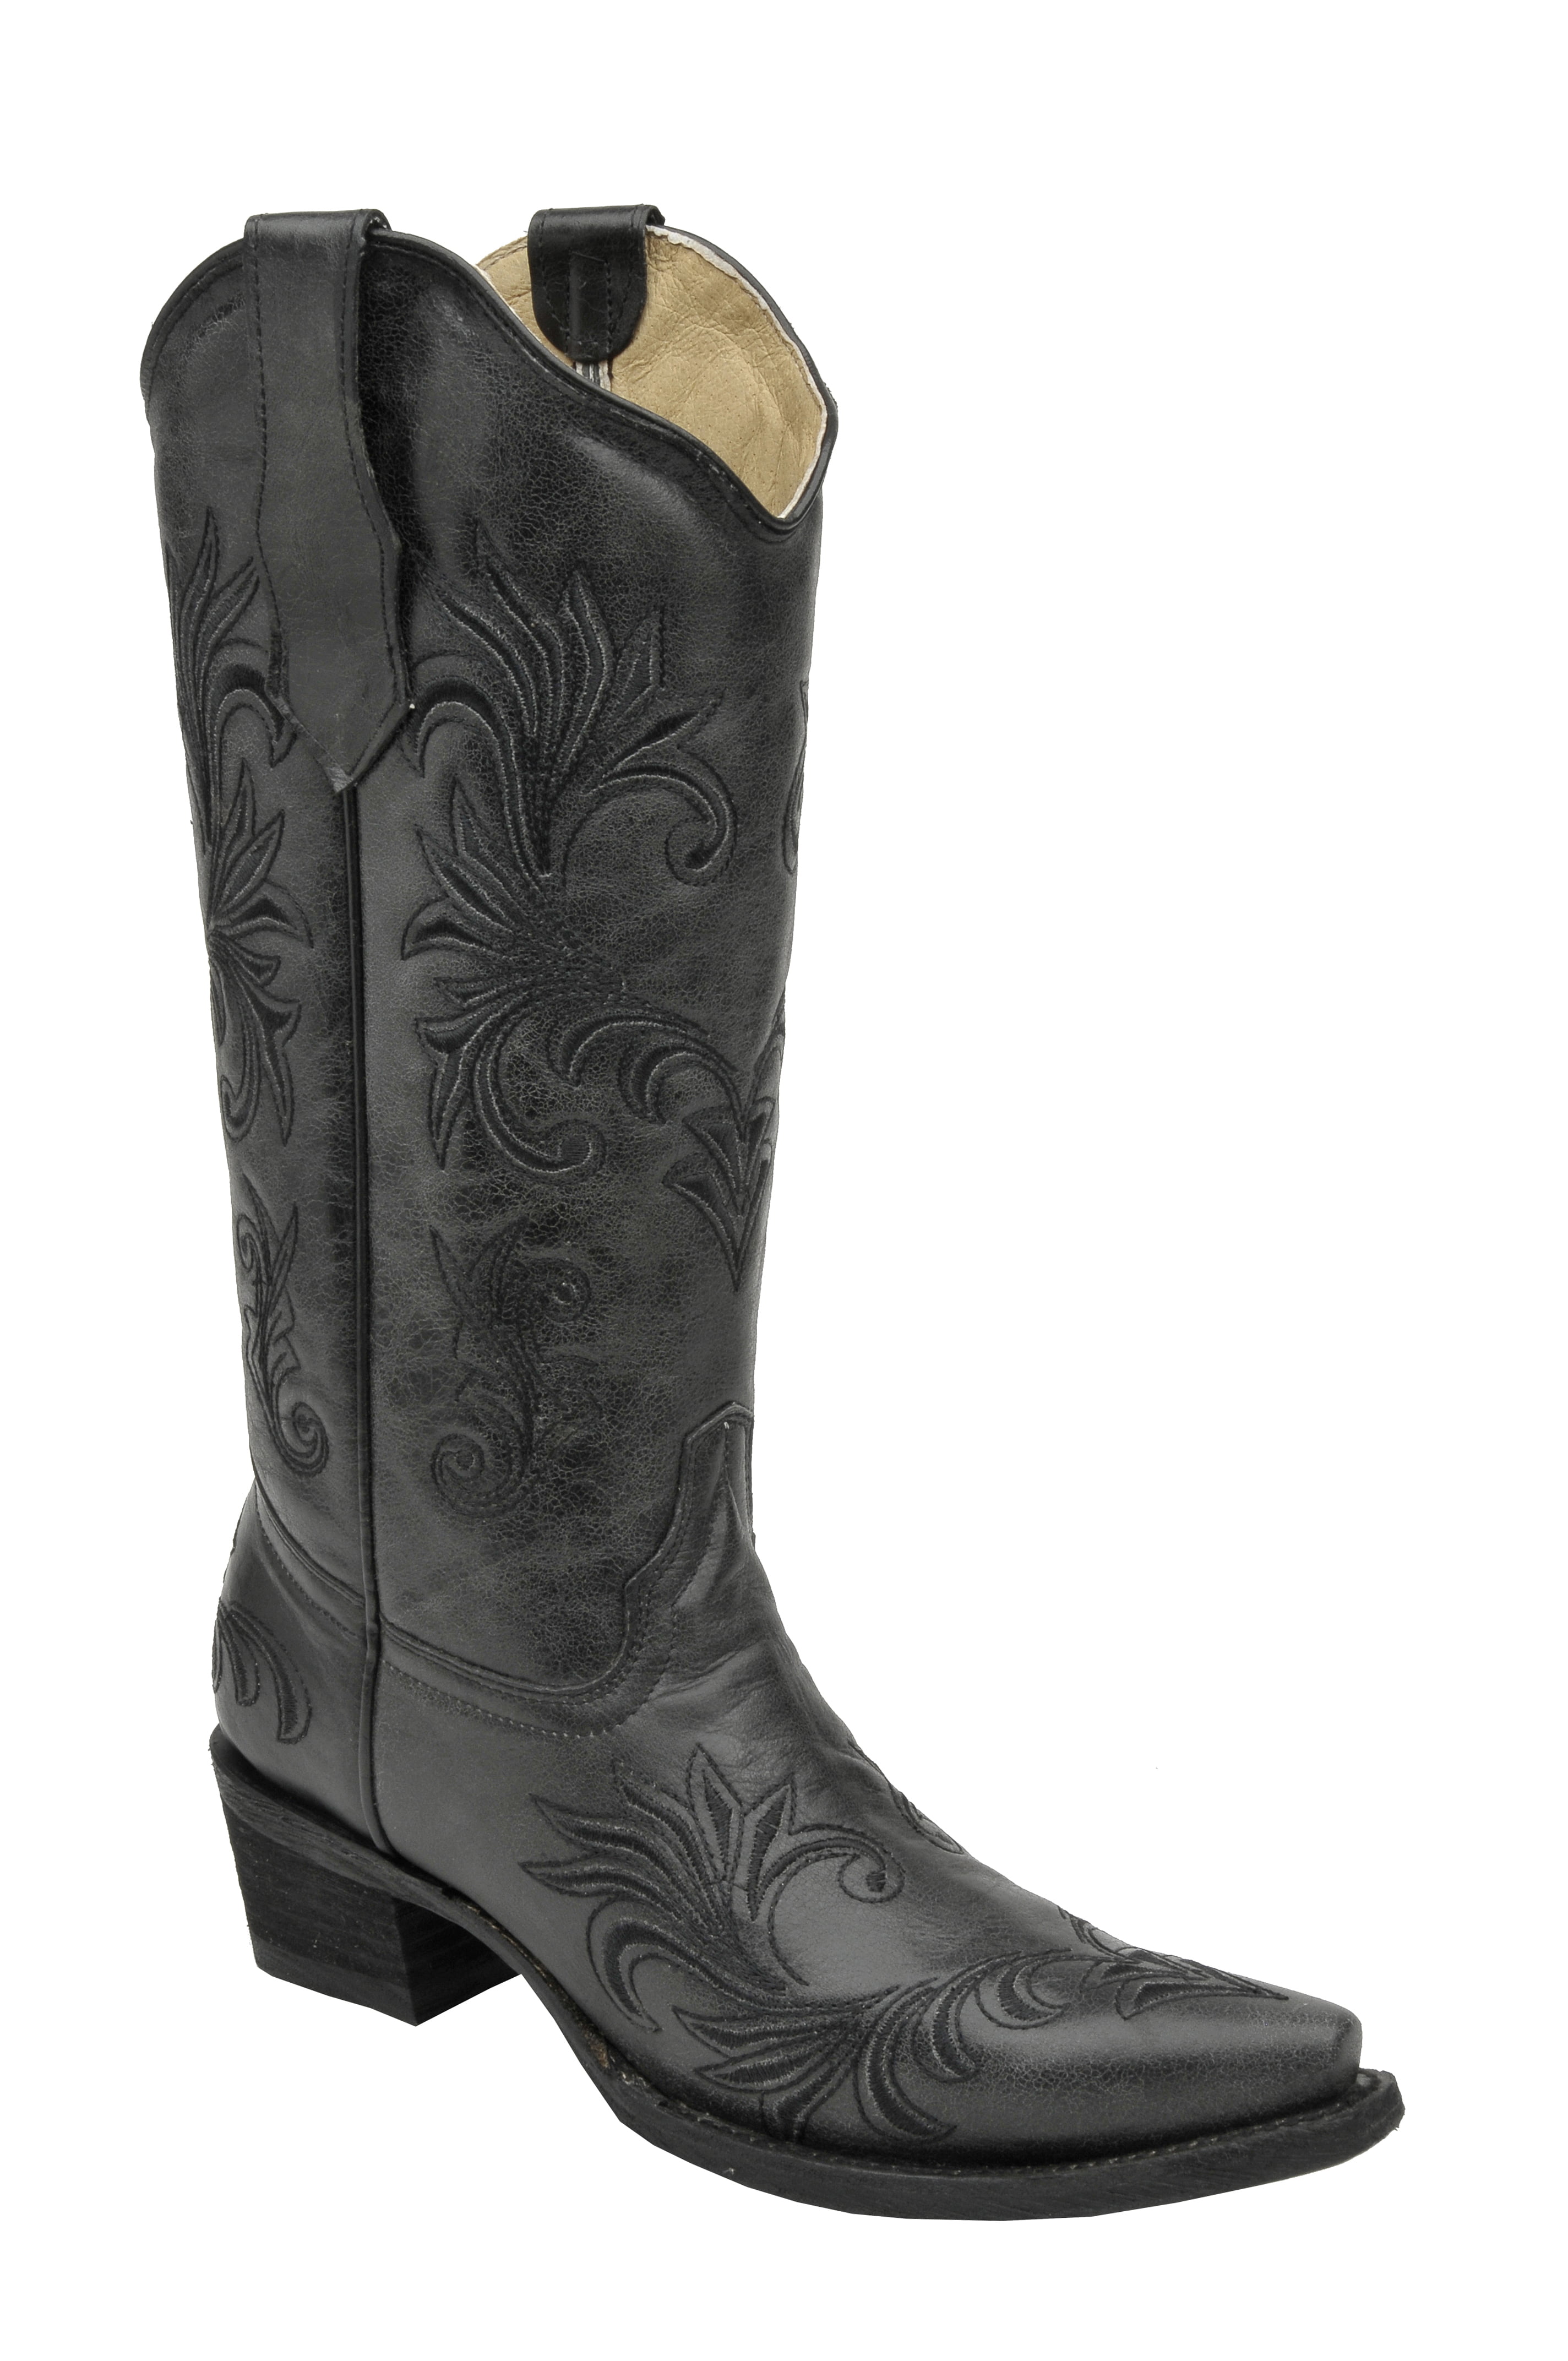 Corral Boots - Corral Women's Circle G Black Filigree Embroidered Western Boot - Walmart.com